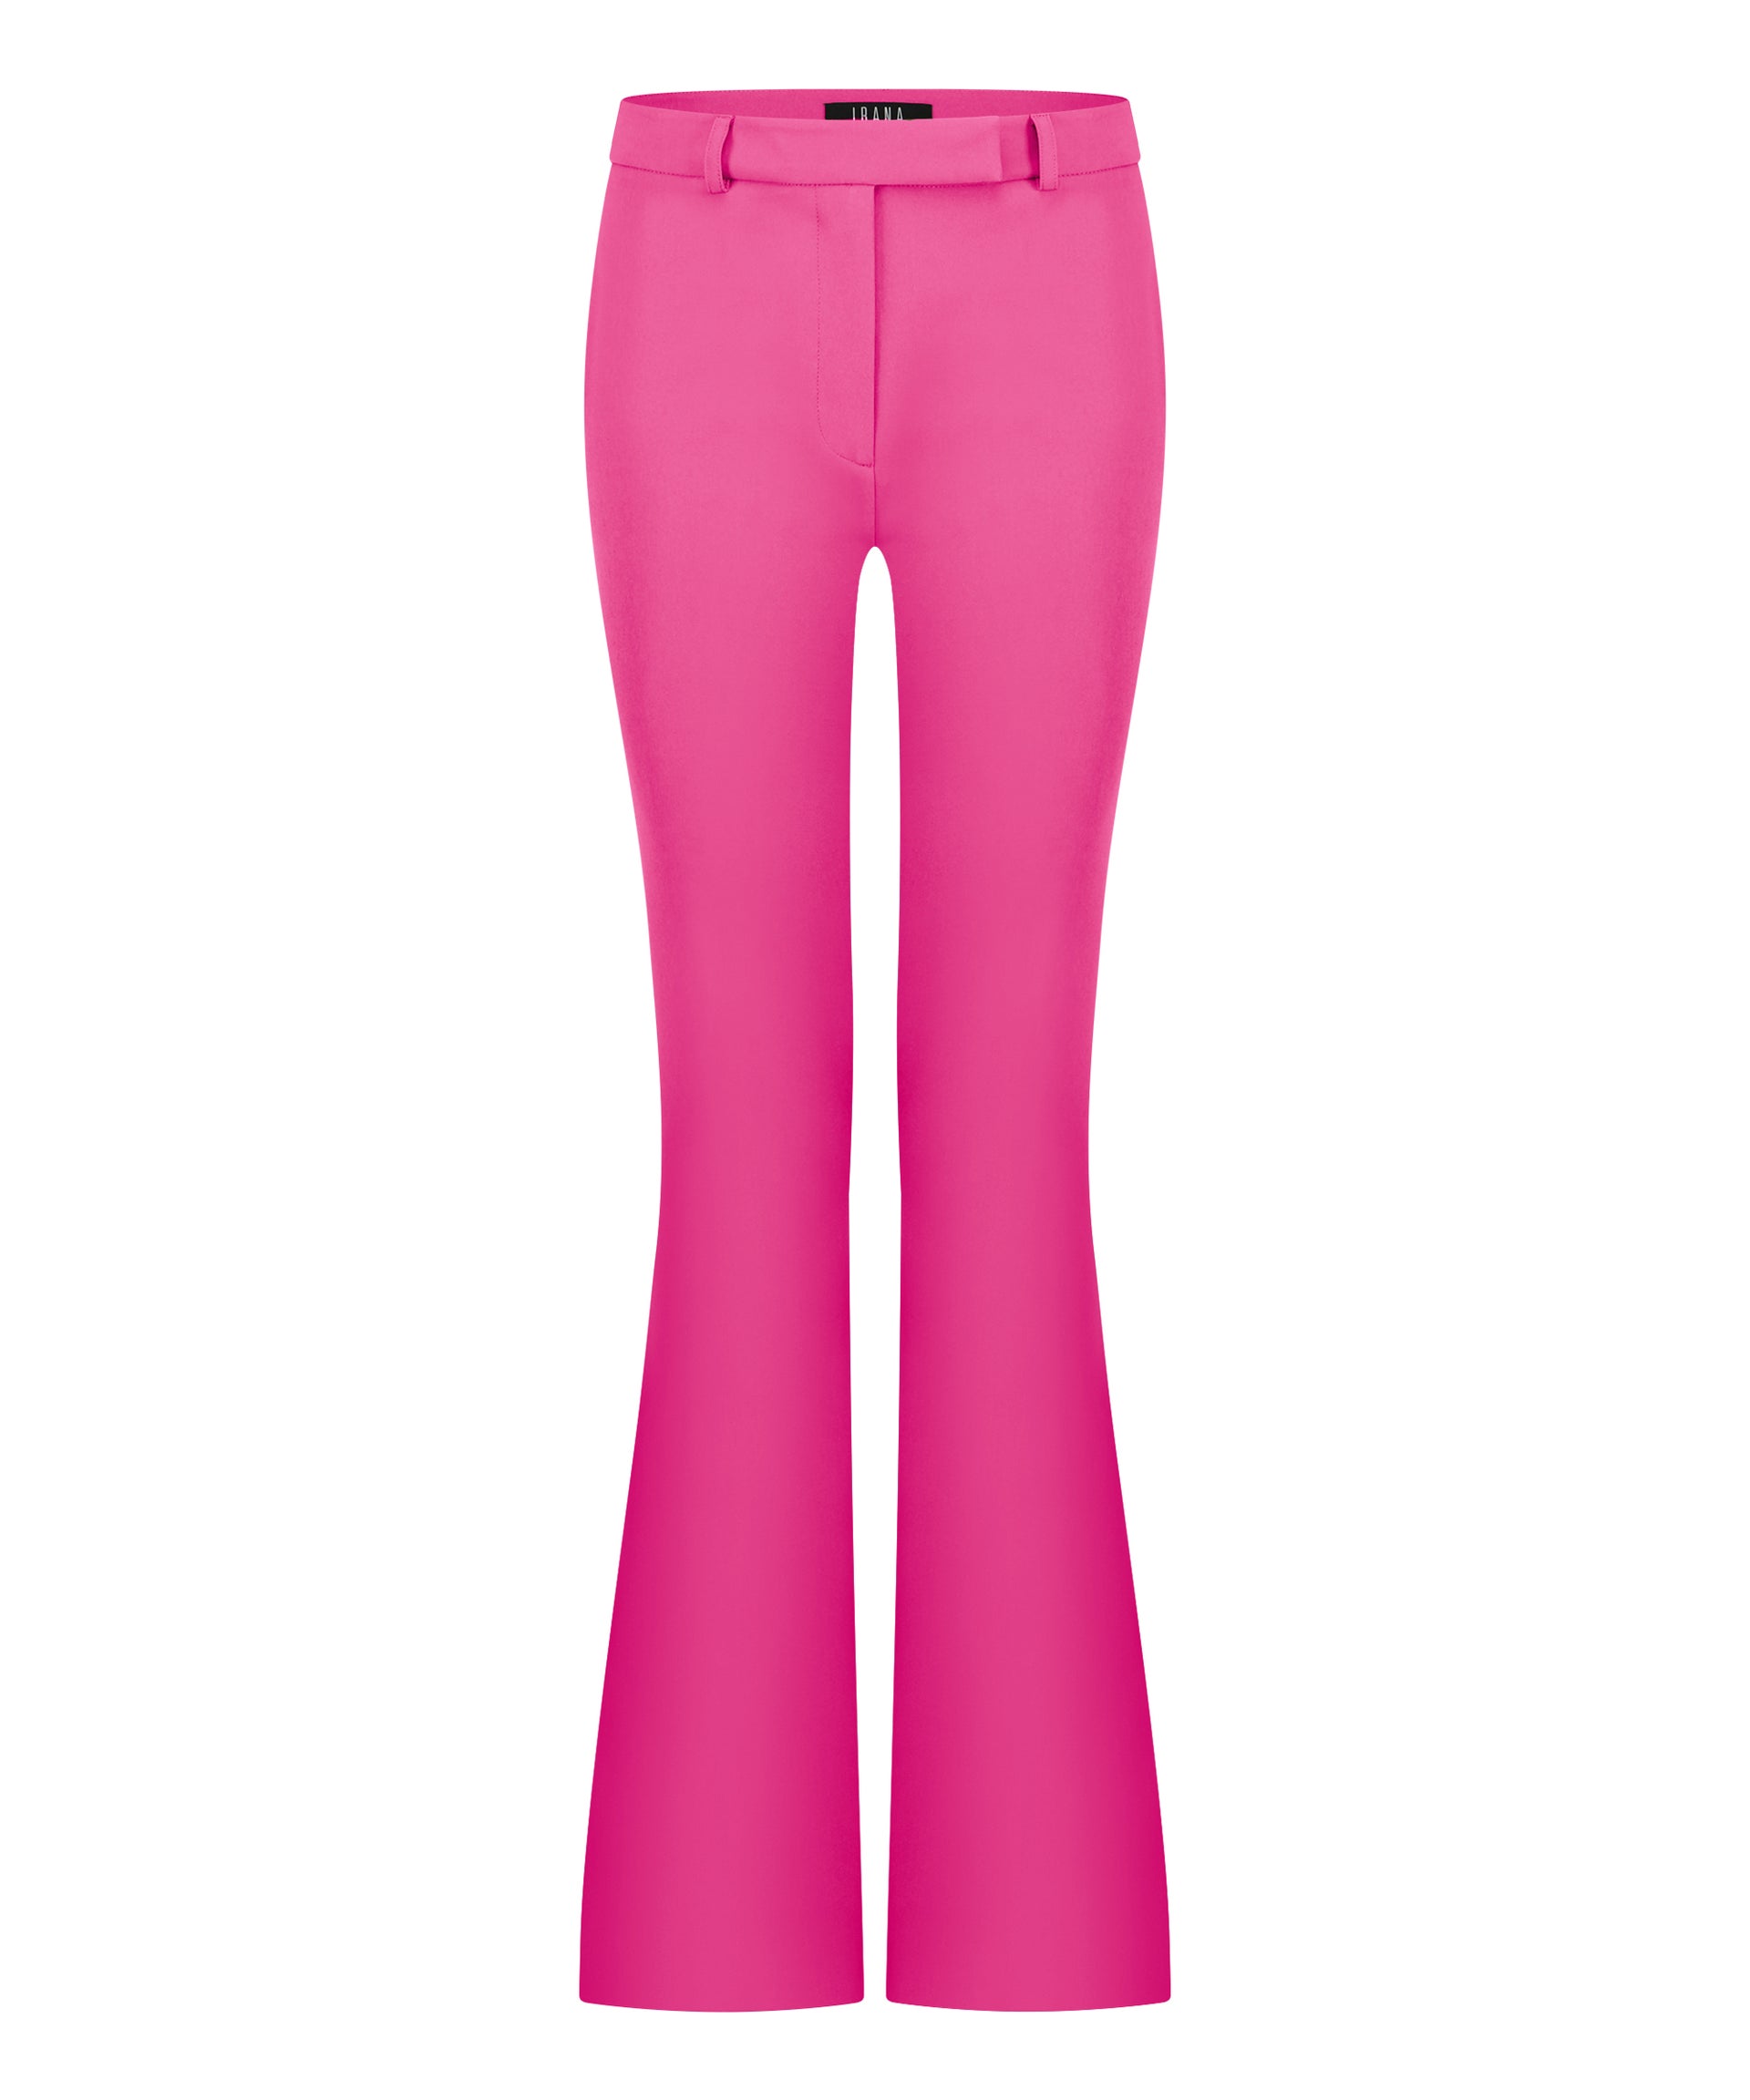 PERRIE BRIGHT PINK